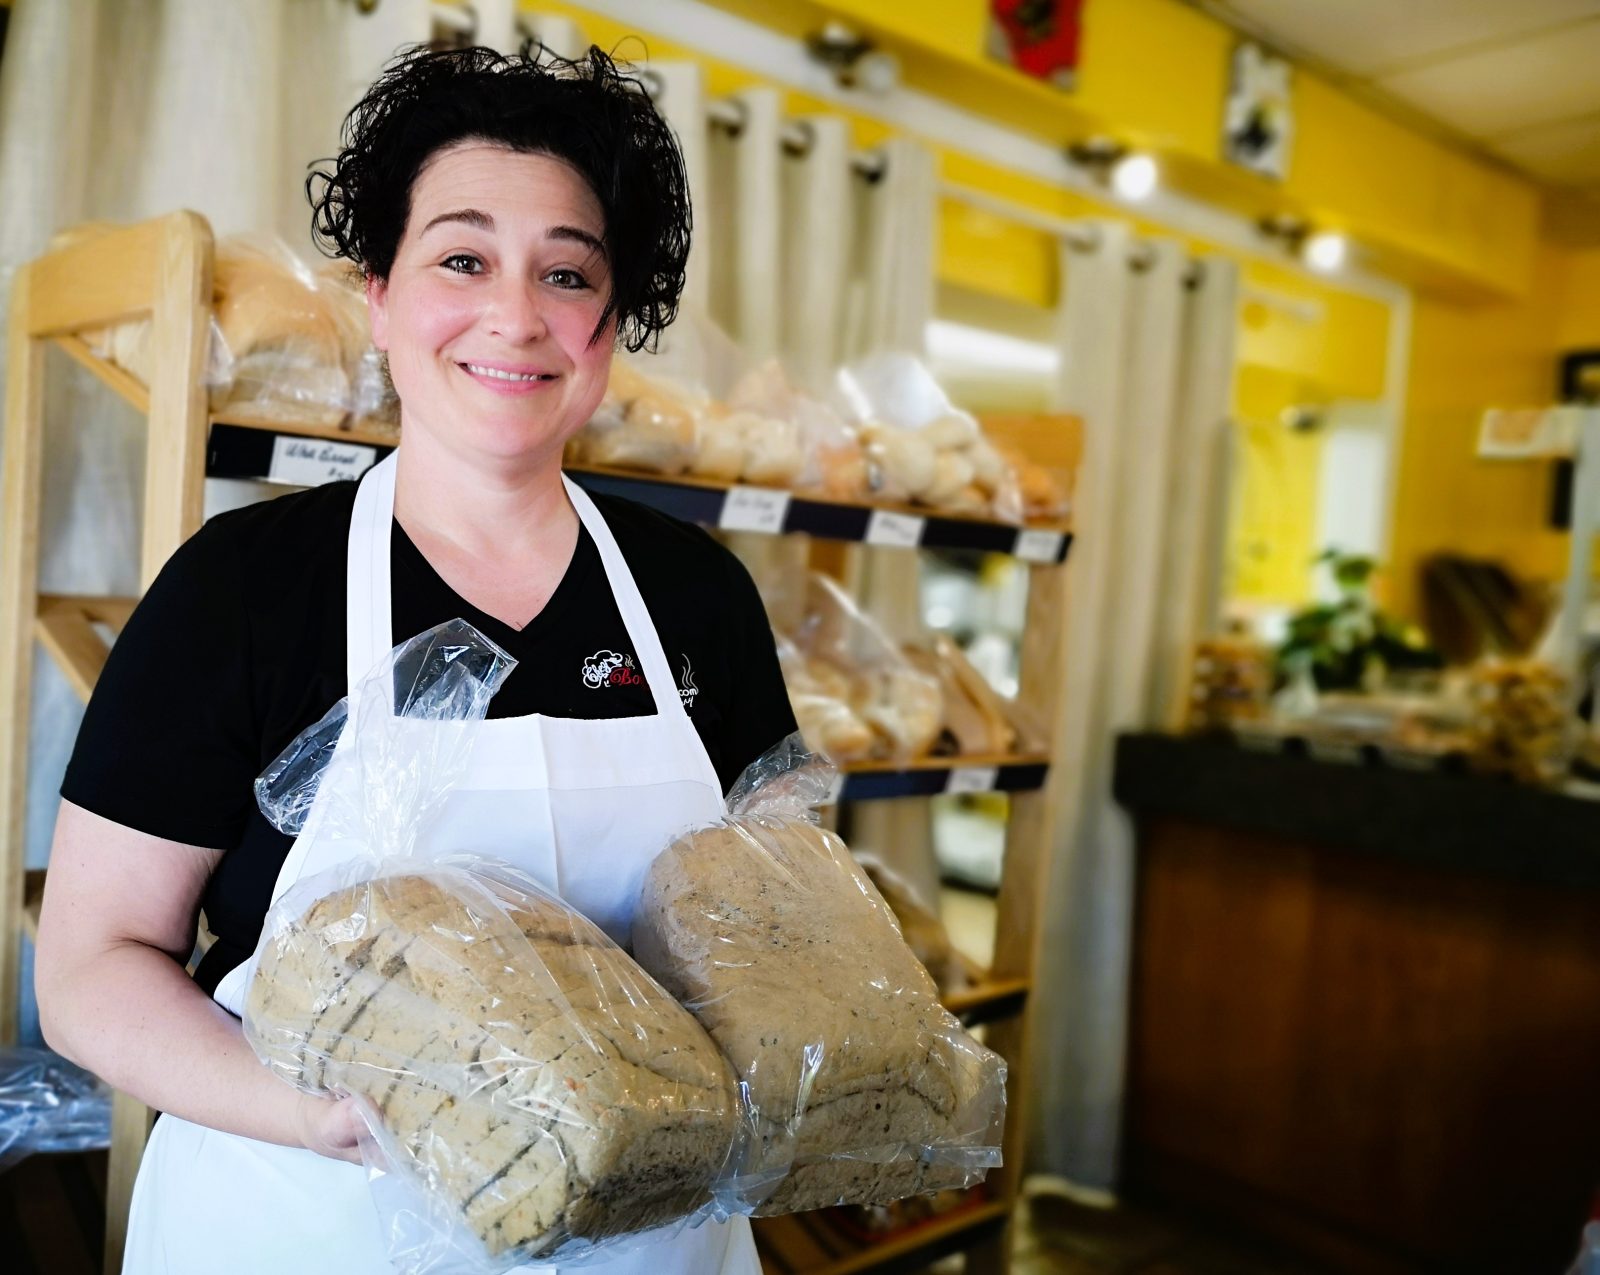 Chez L’Boulanger’s world of bread and other goods